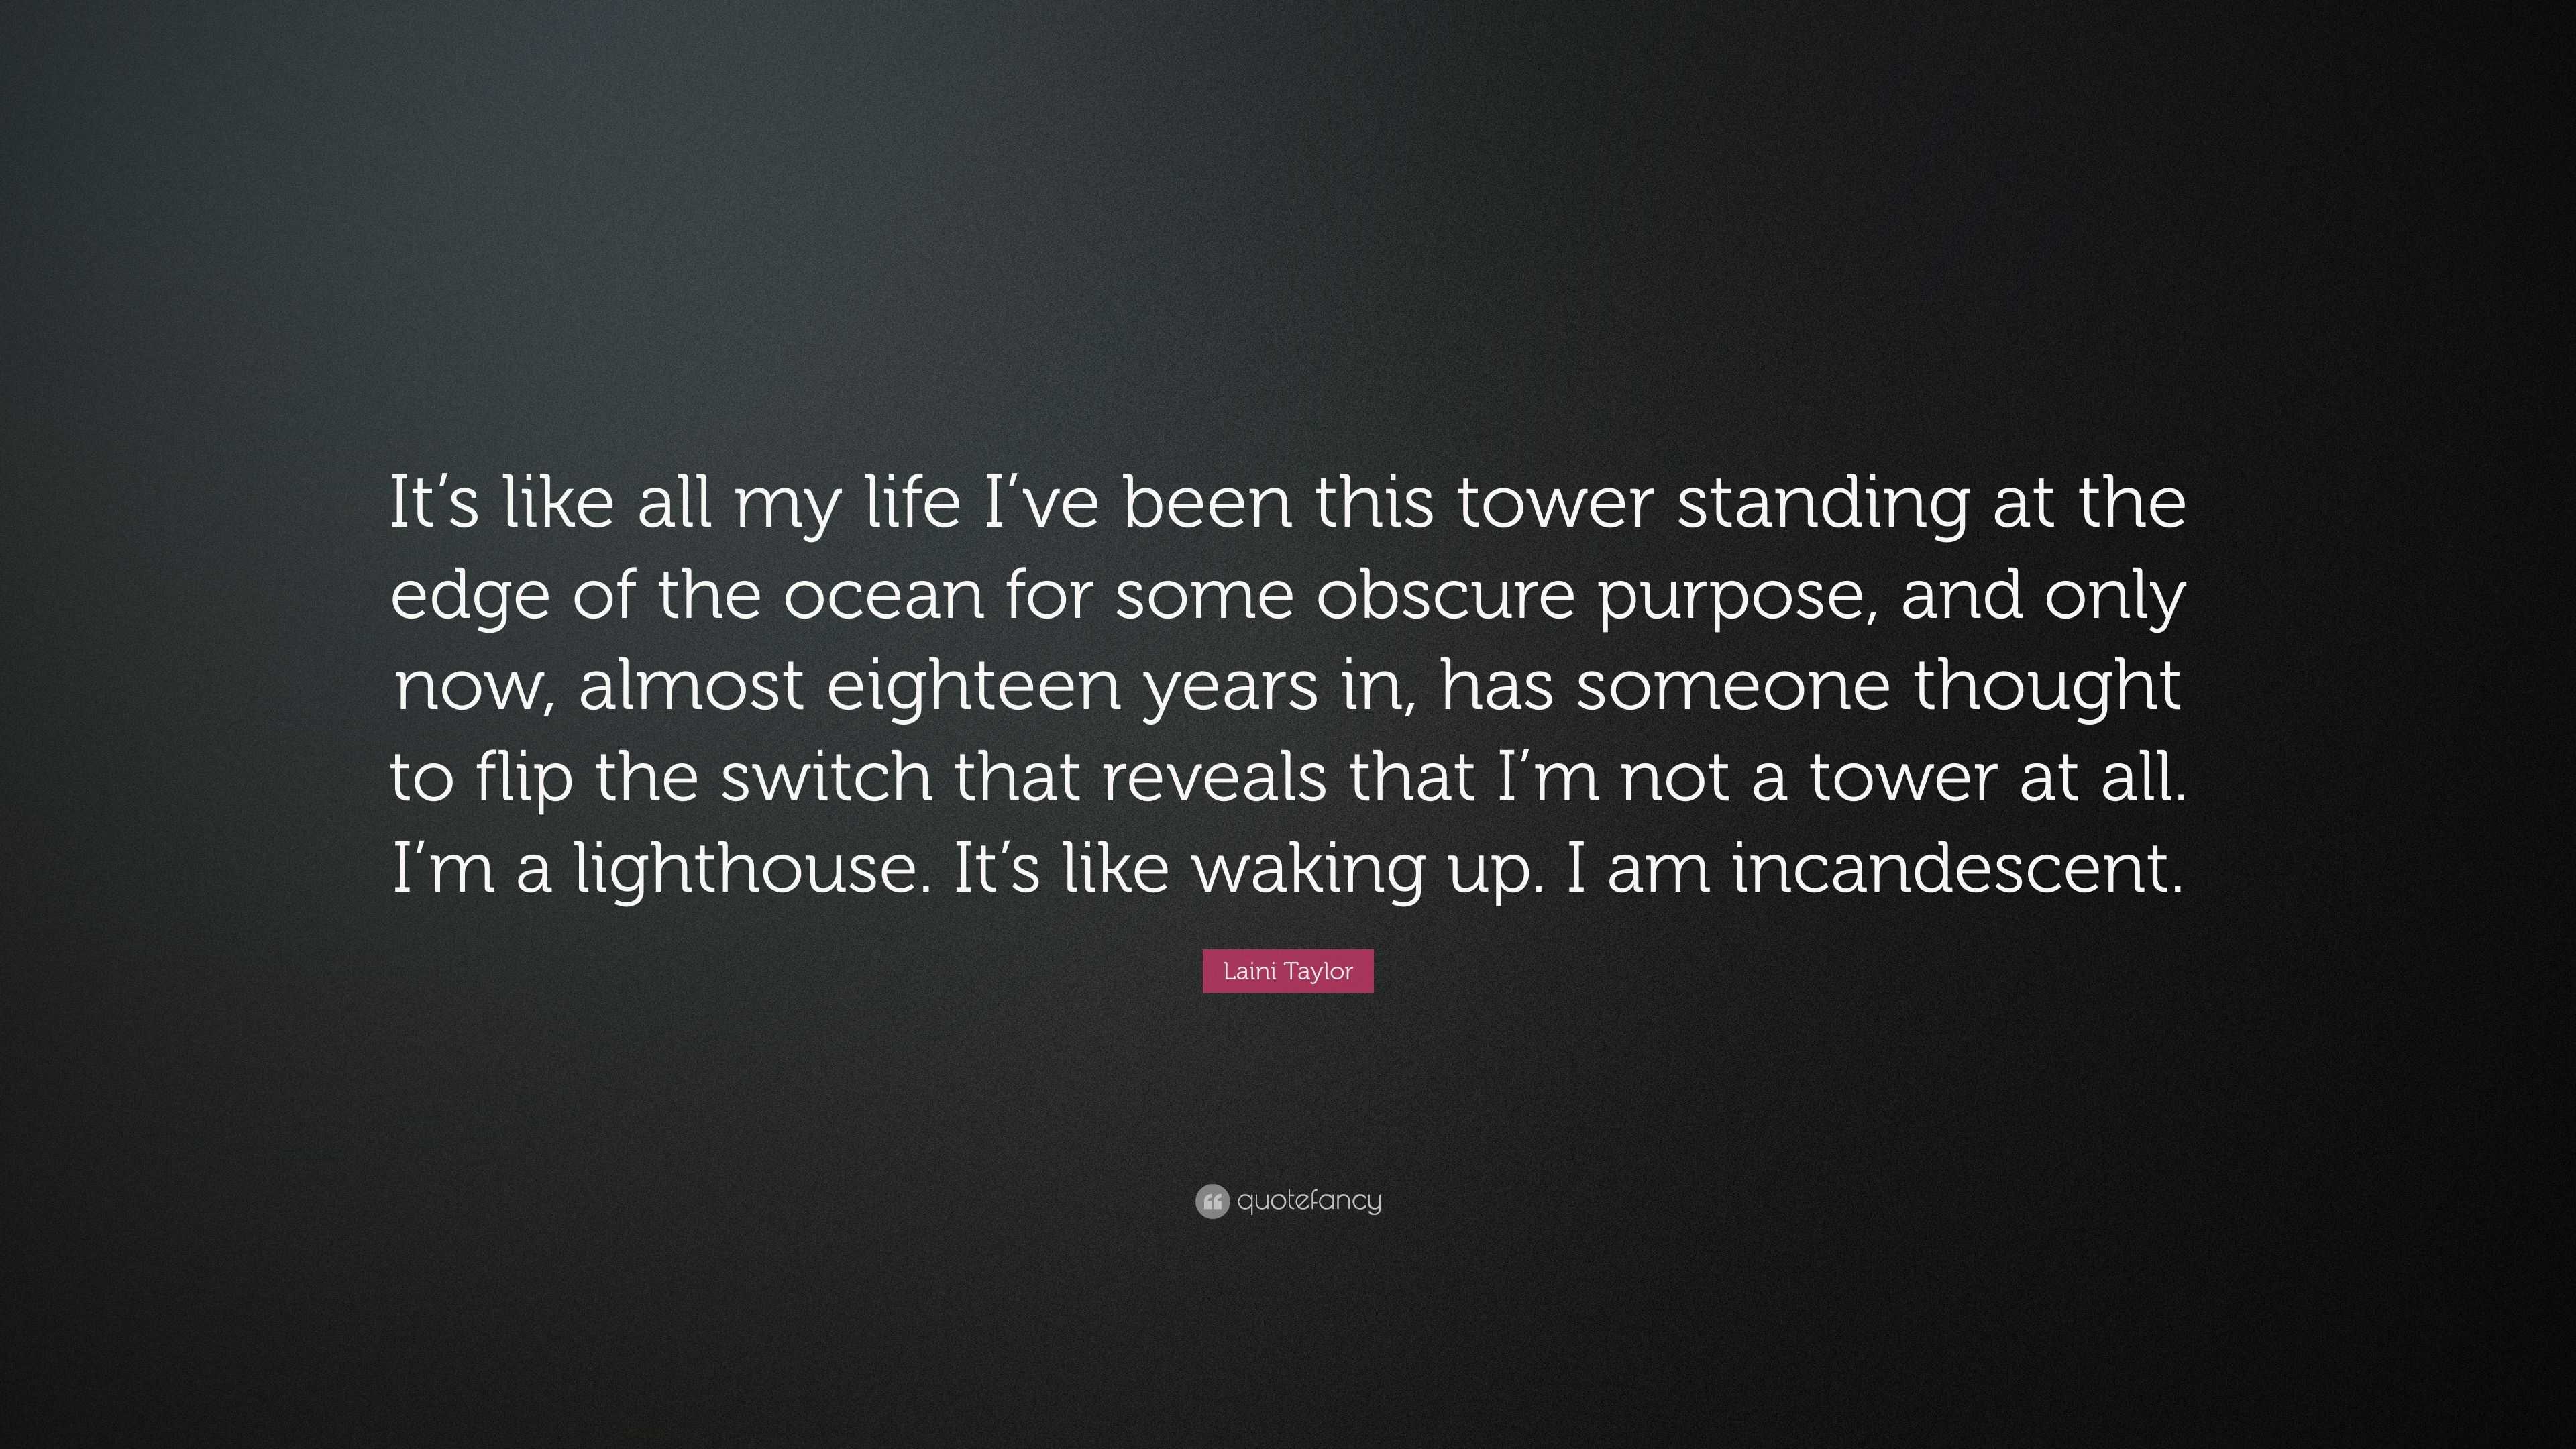 Laini Taylor Quote It S Like All My Life I Ve Been This Tower Standing At The Edge Of The Ocean For Some Obscure Purpose And Only Now Alm 7 Wallpapers Quotefancy